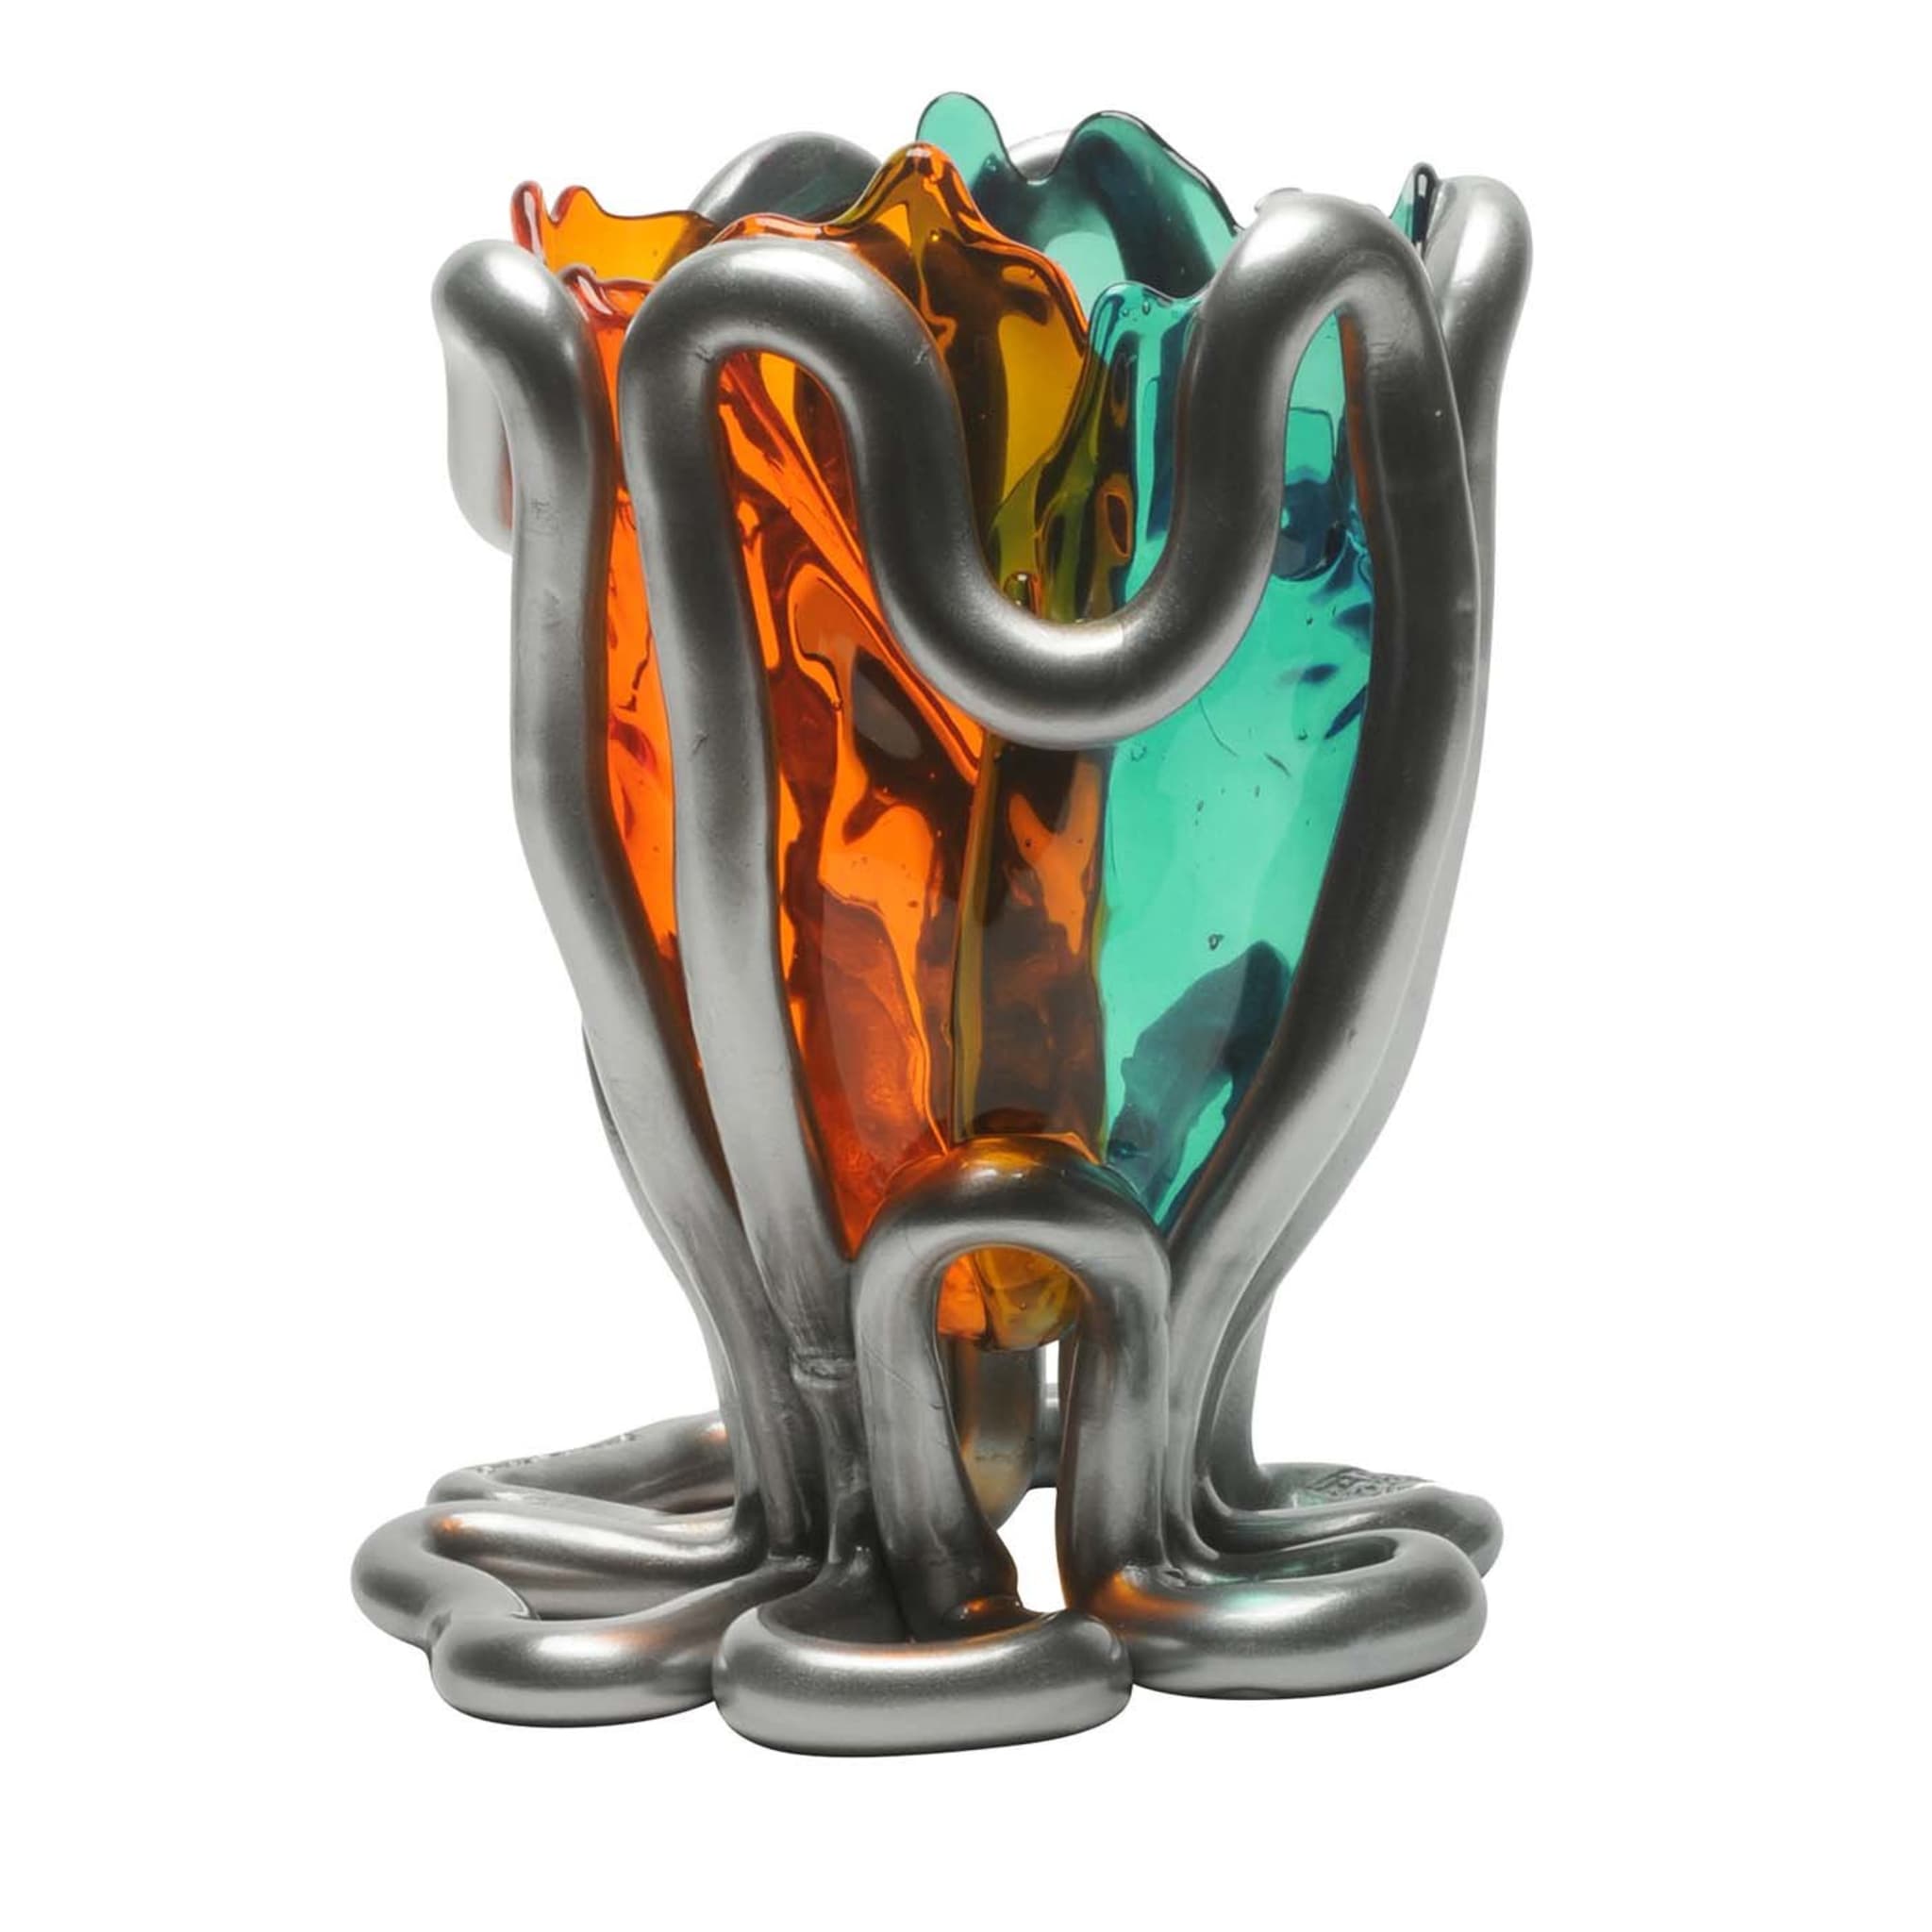 Indian Summer Extracolor Medium Vase by Gaetano Pesce - Main view